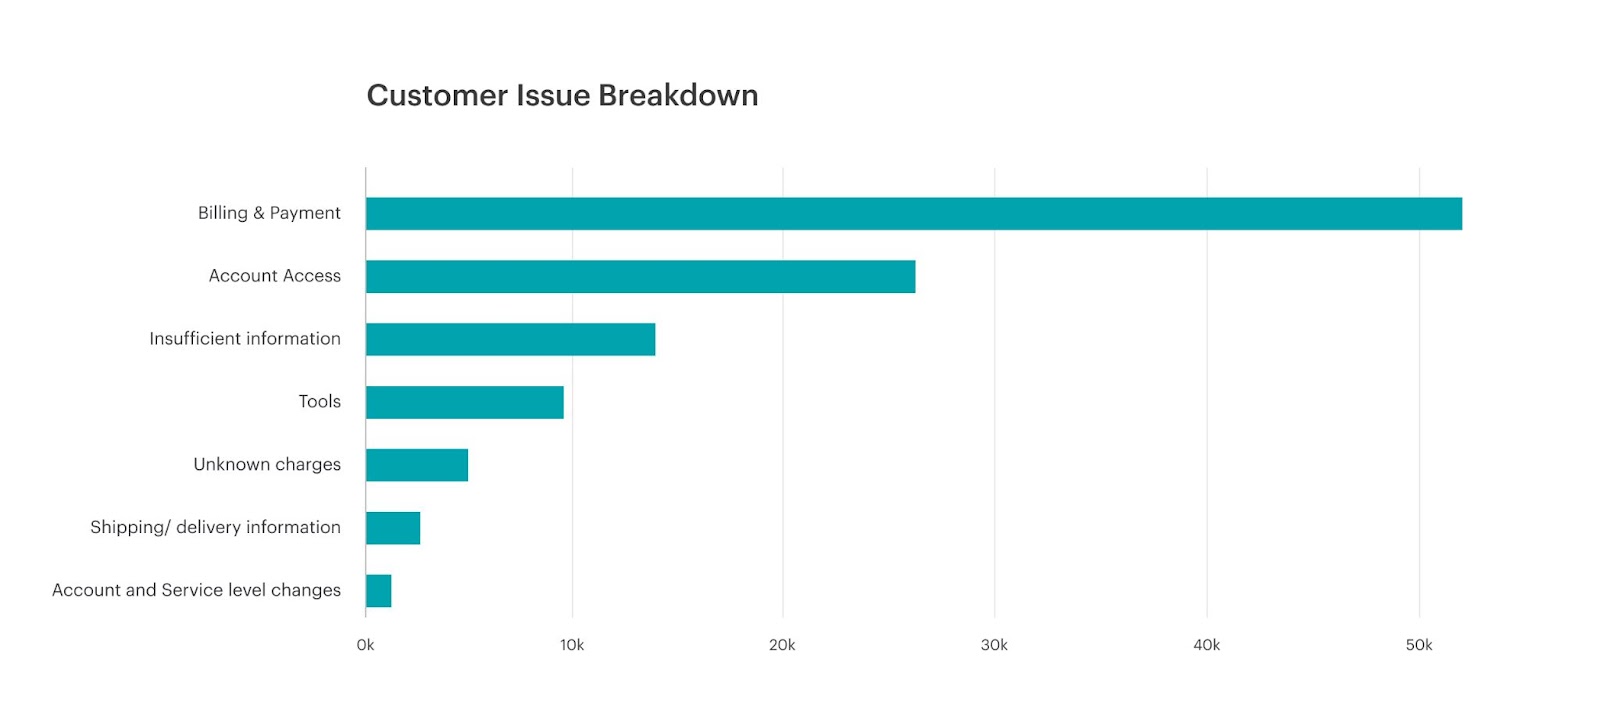 Horizontal bar chart showing break down of example customer issues.